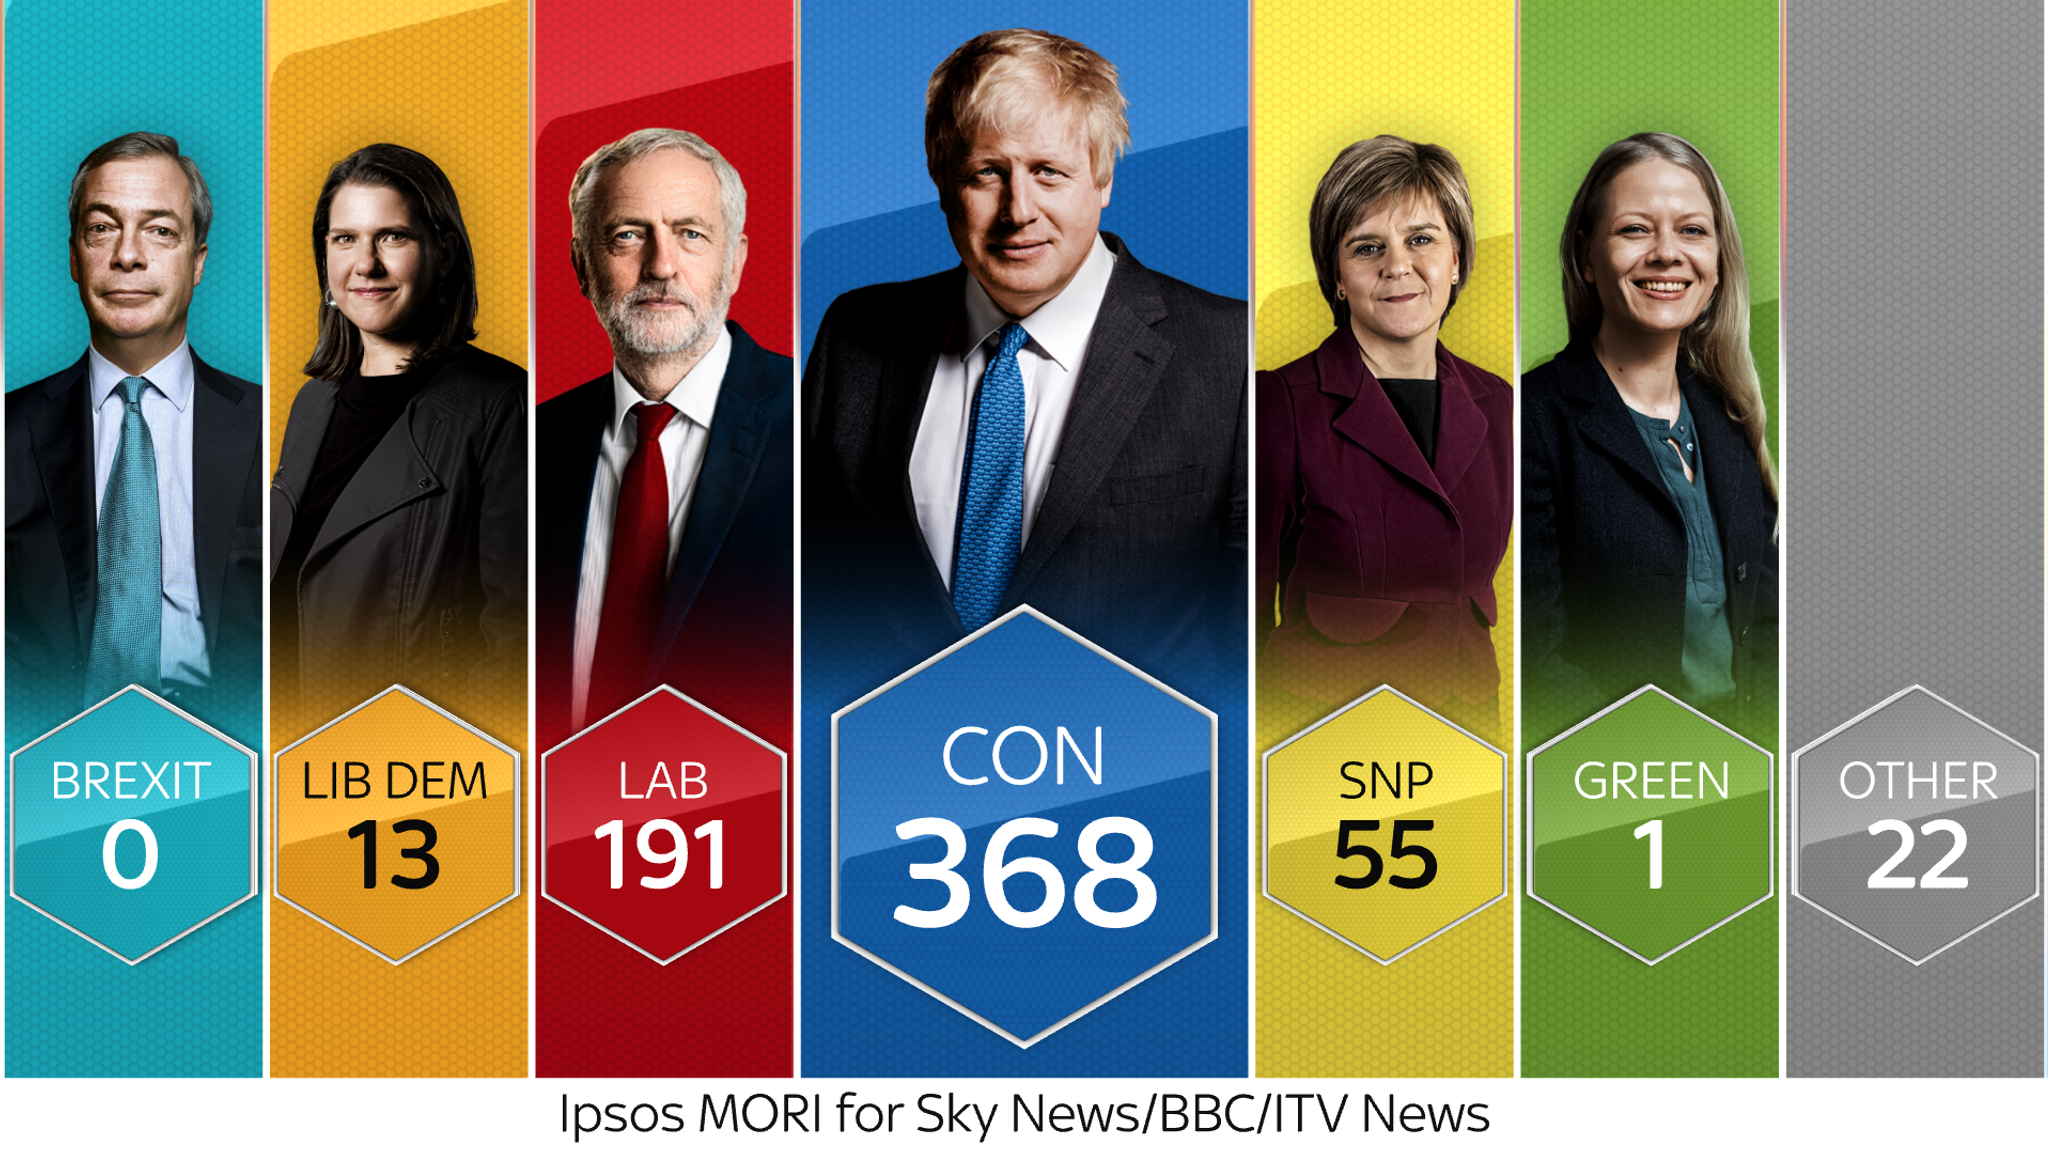 General election: Conservatives predicted to win with commanding majority -  exit poll | Politics News | Sky News